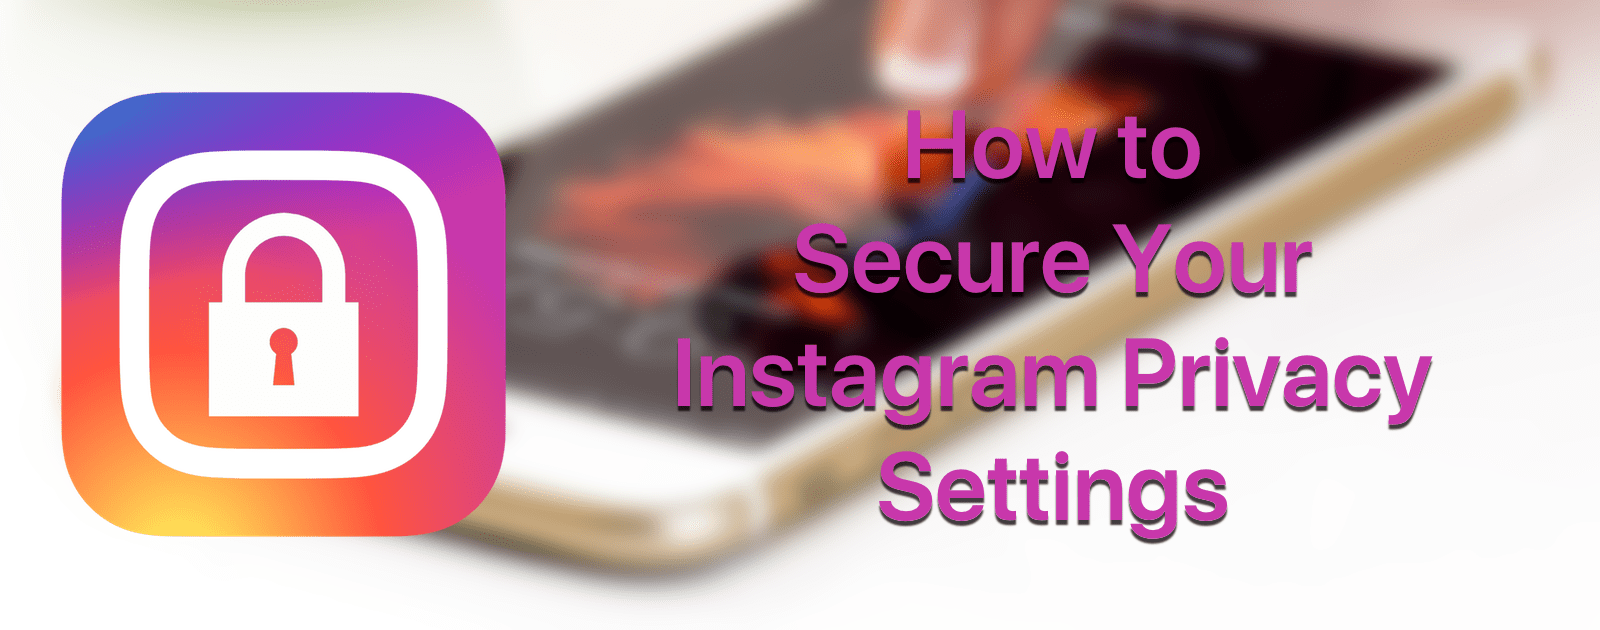 How to Secure Your Instagram Privacy Settings